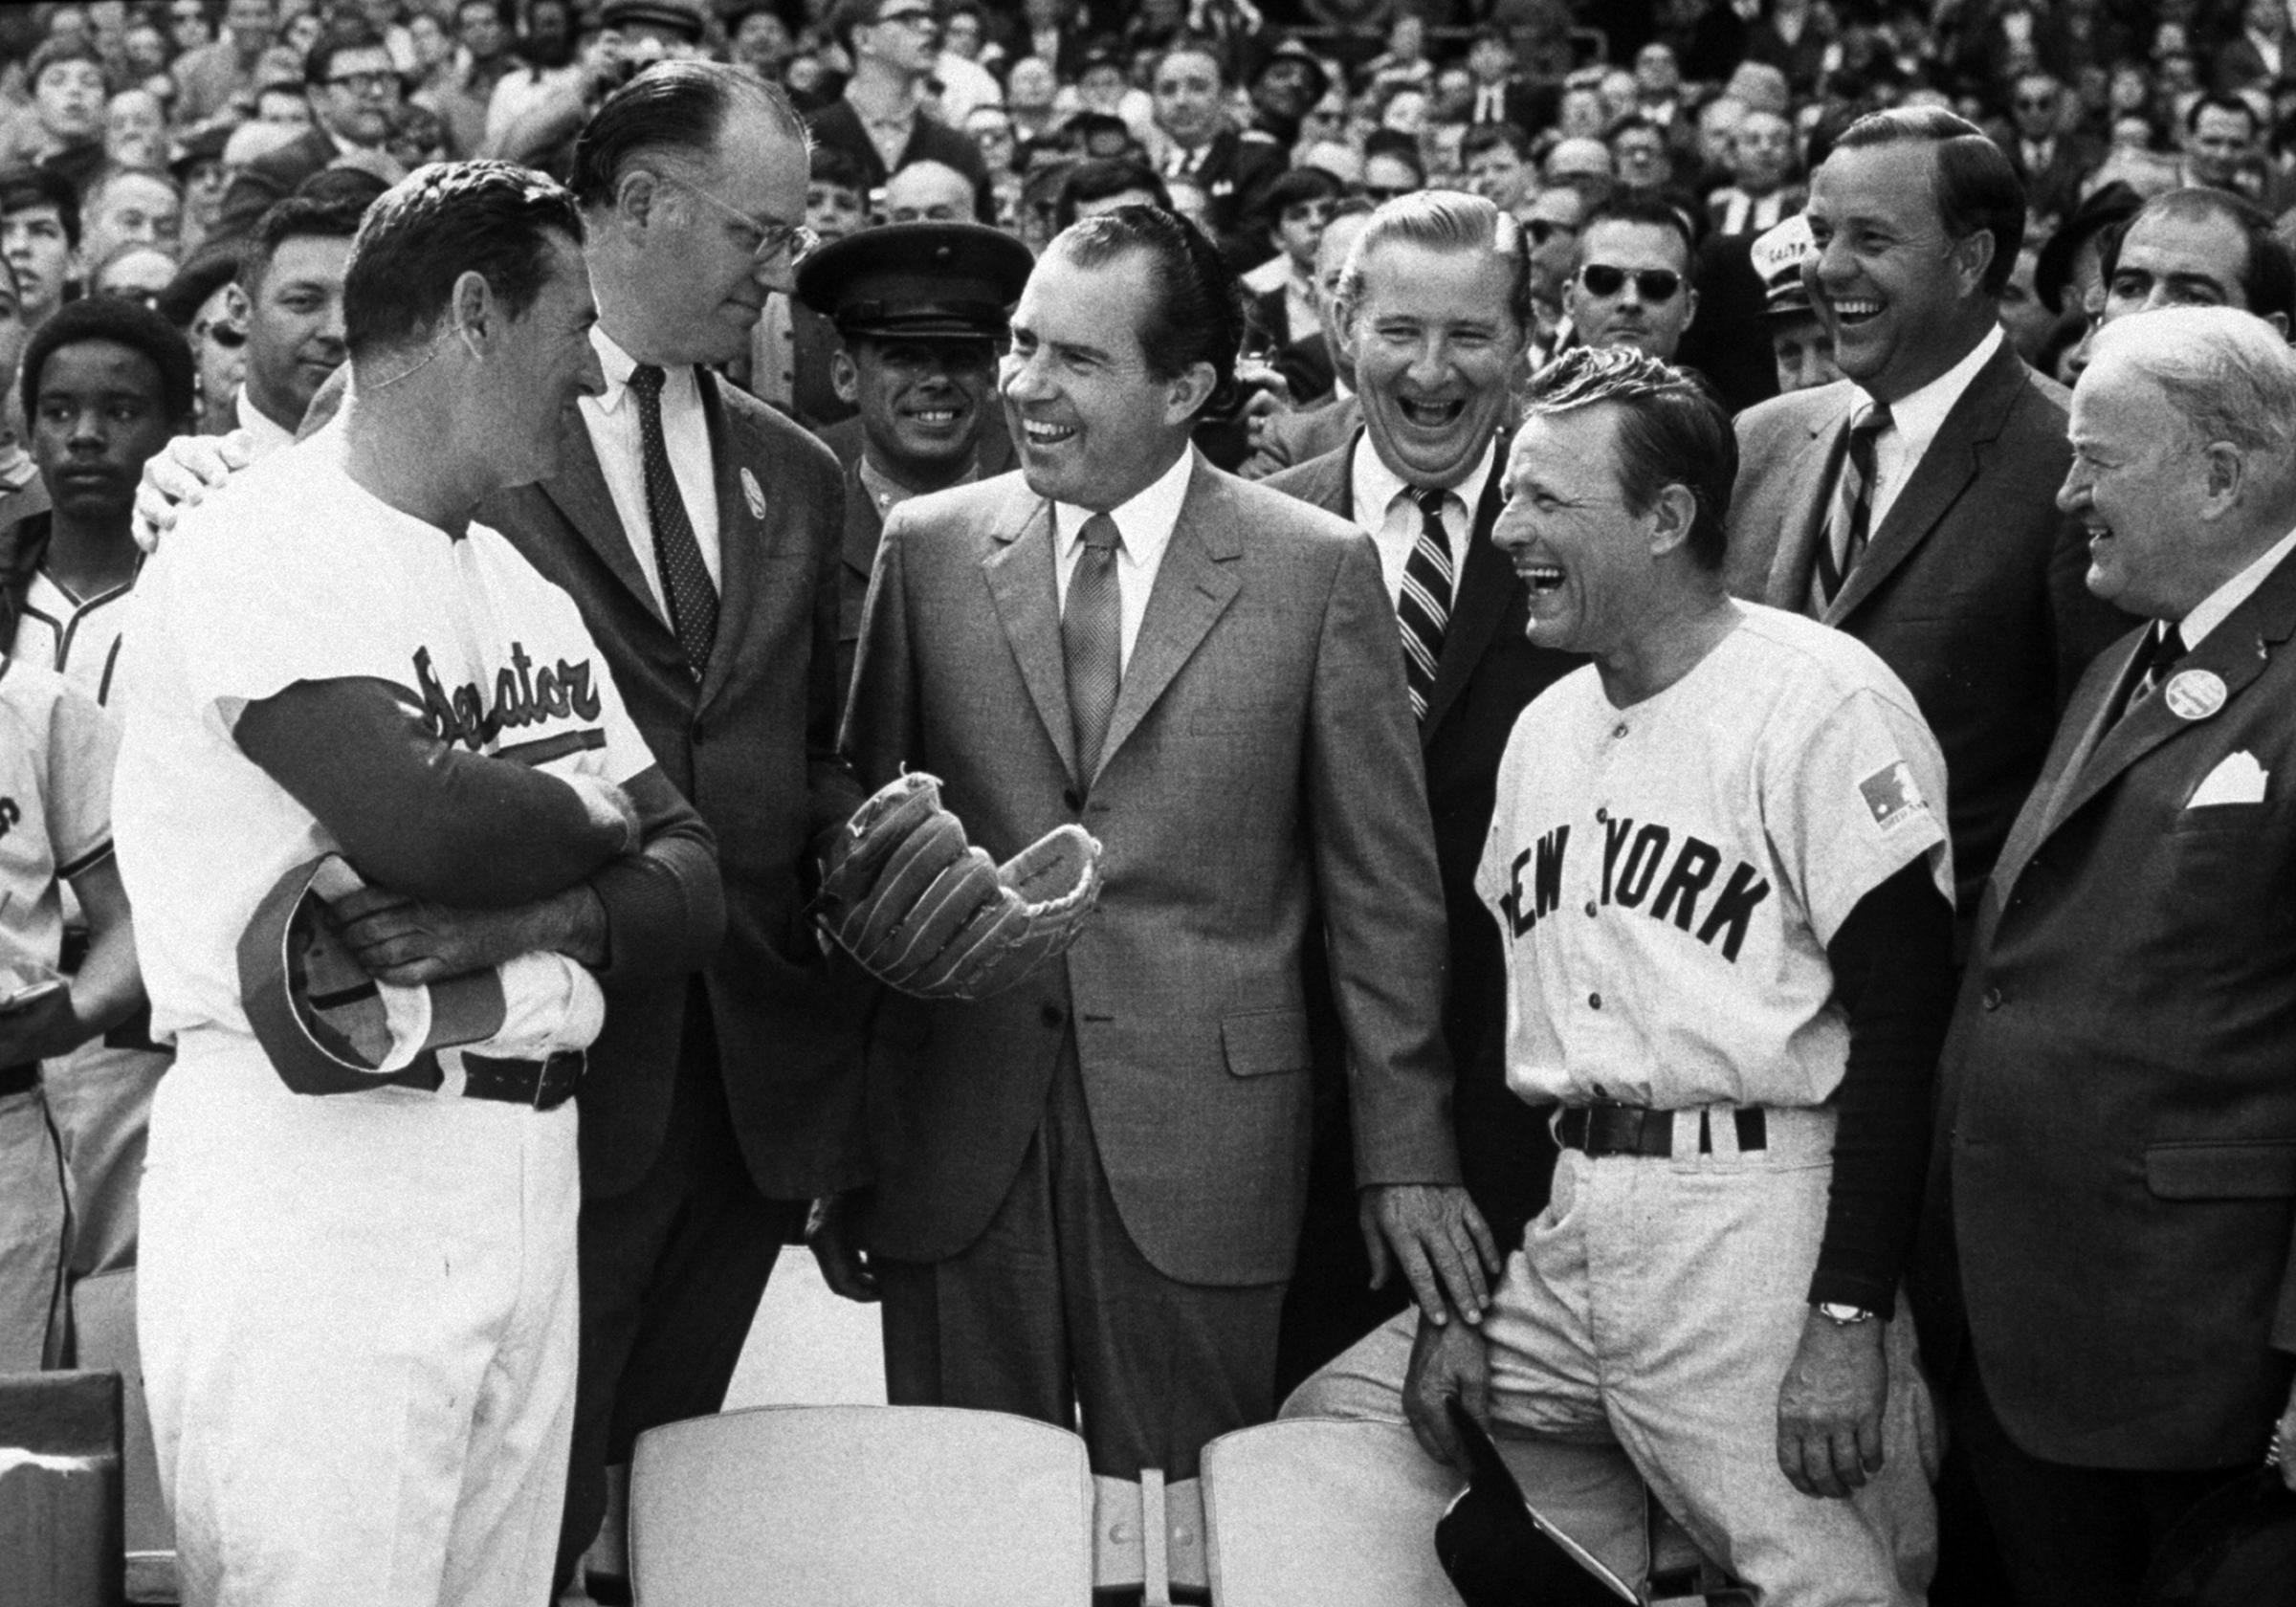 President Richard Nixon throws out the first pitch as manager Ted Williams of the Washington Senators, the MLB Commisioner Bowie Kuhn and manager Ralph Houk of the New York Yankees look on before opening day on April 7, 1969 at RFK Stadium in Washington, D.C.